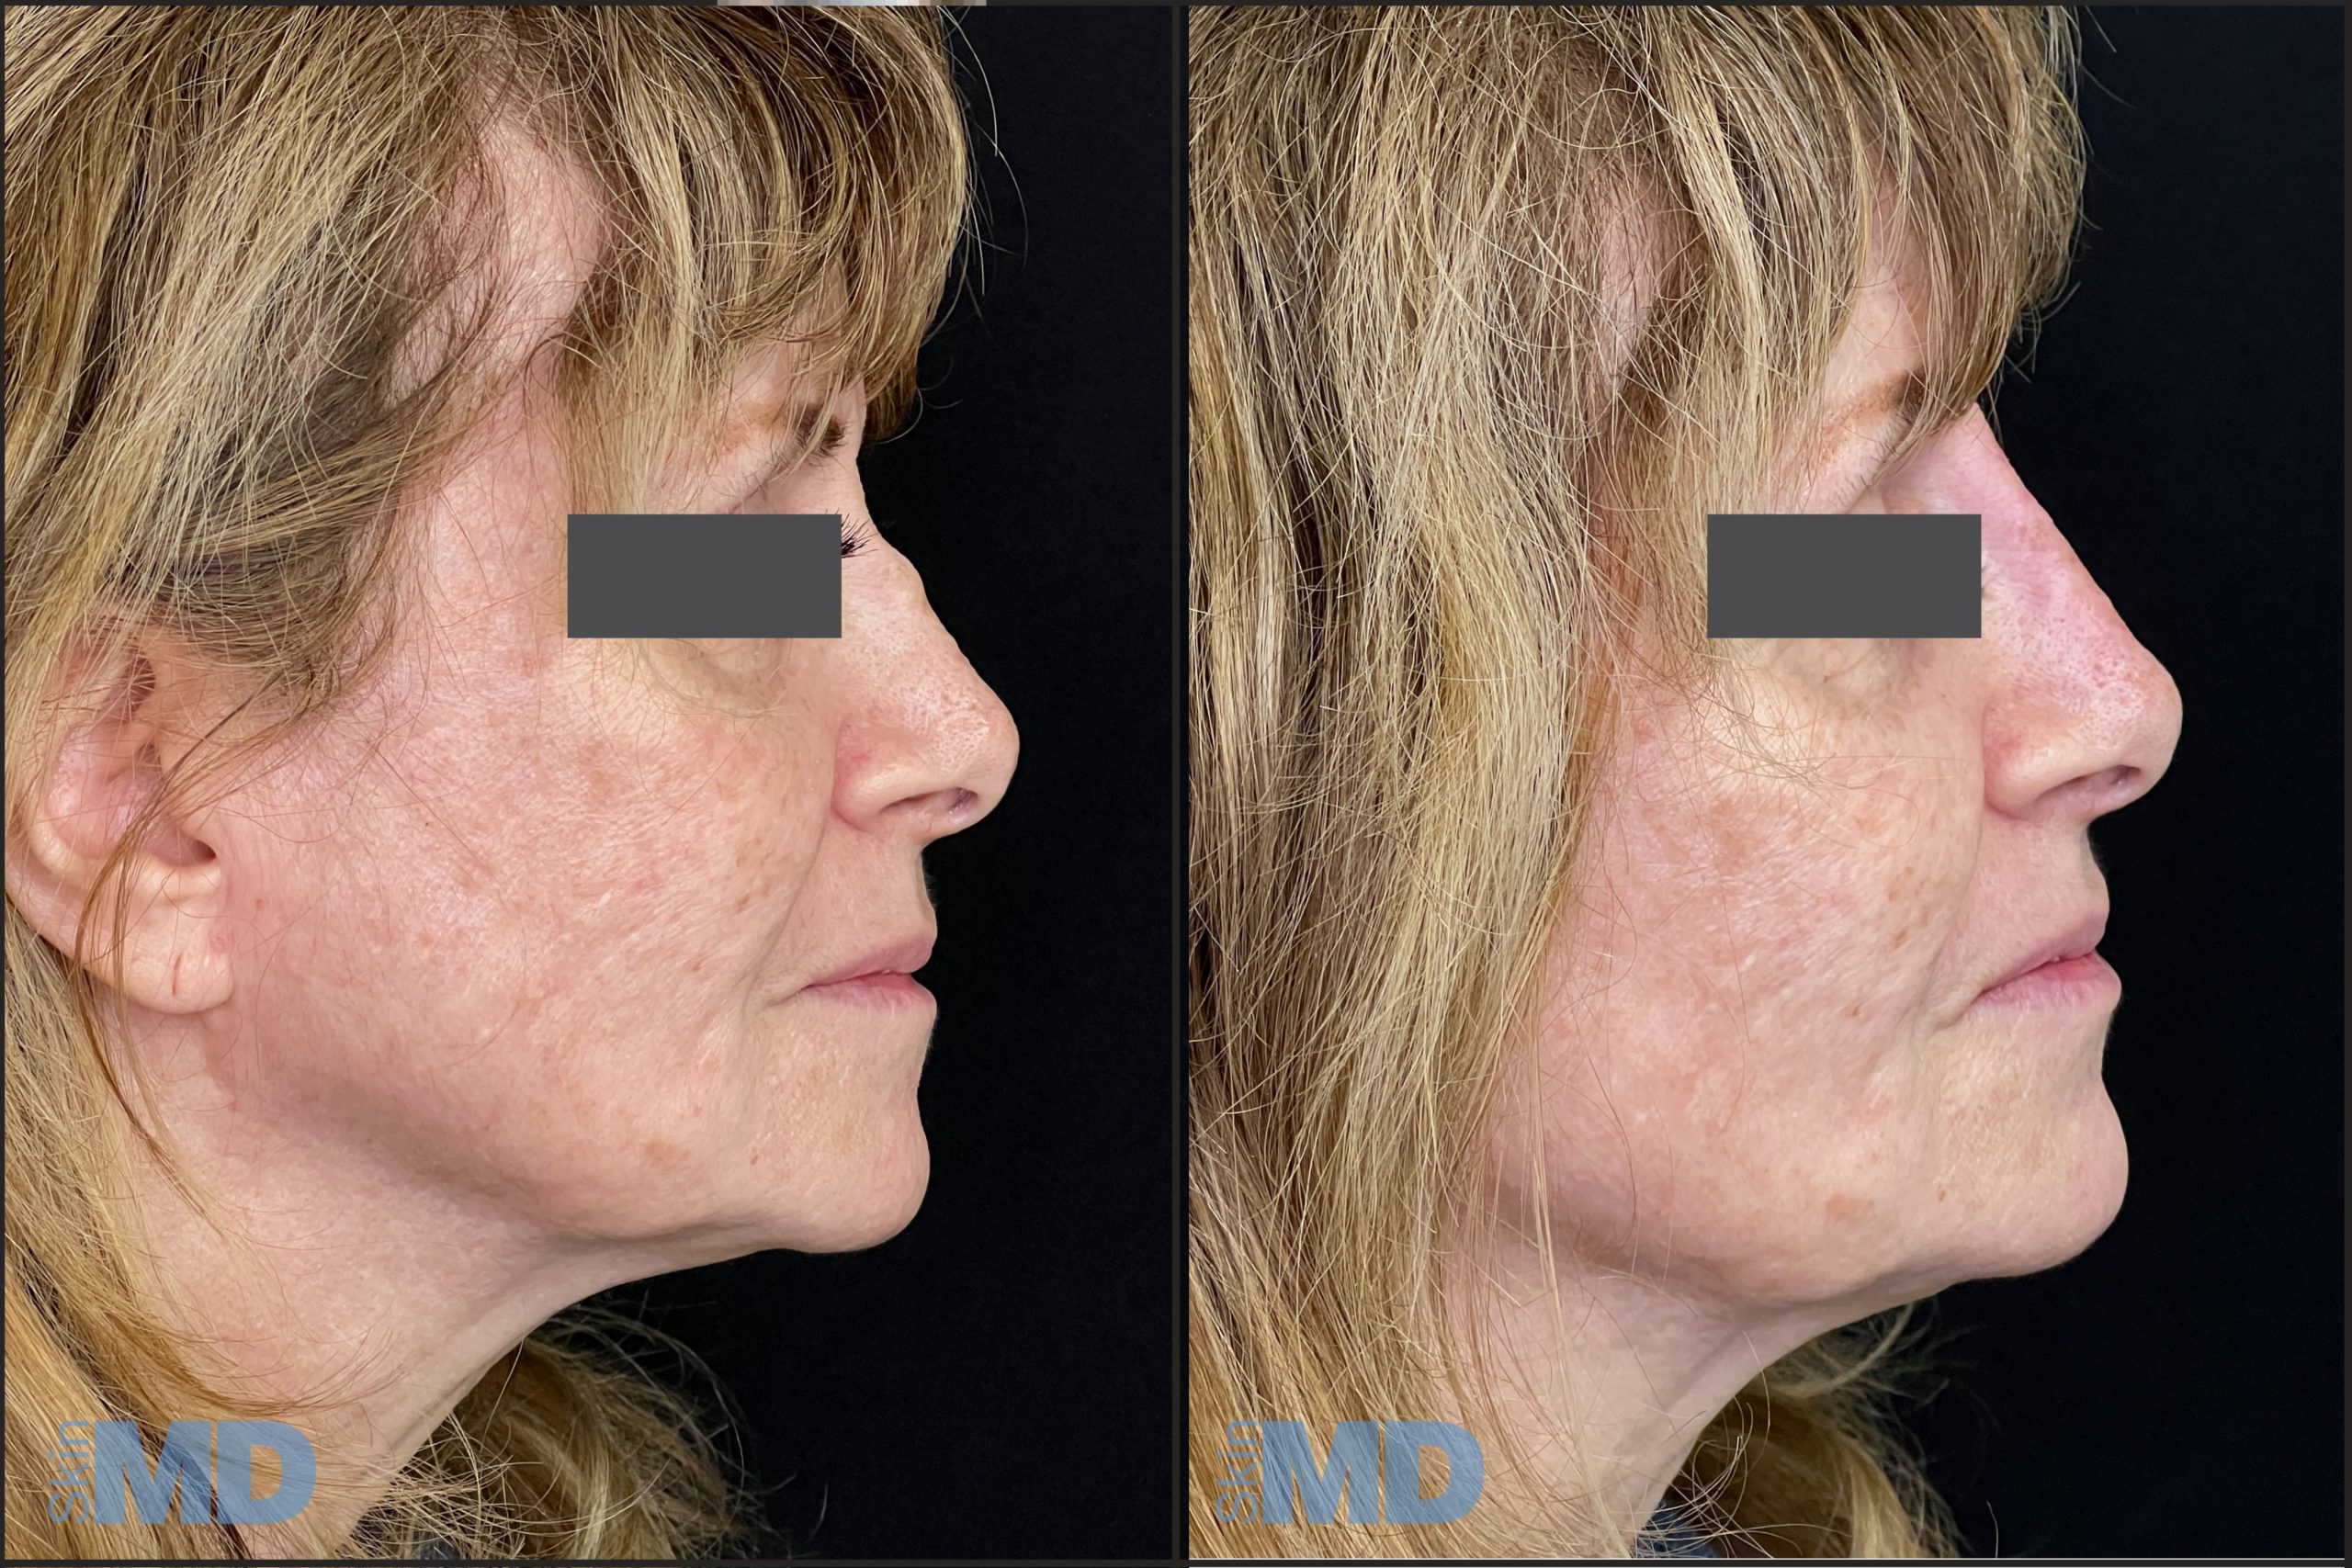 Before and after non-surgical nose job results